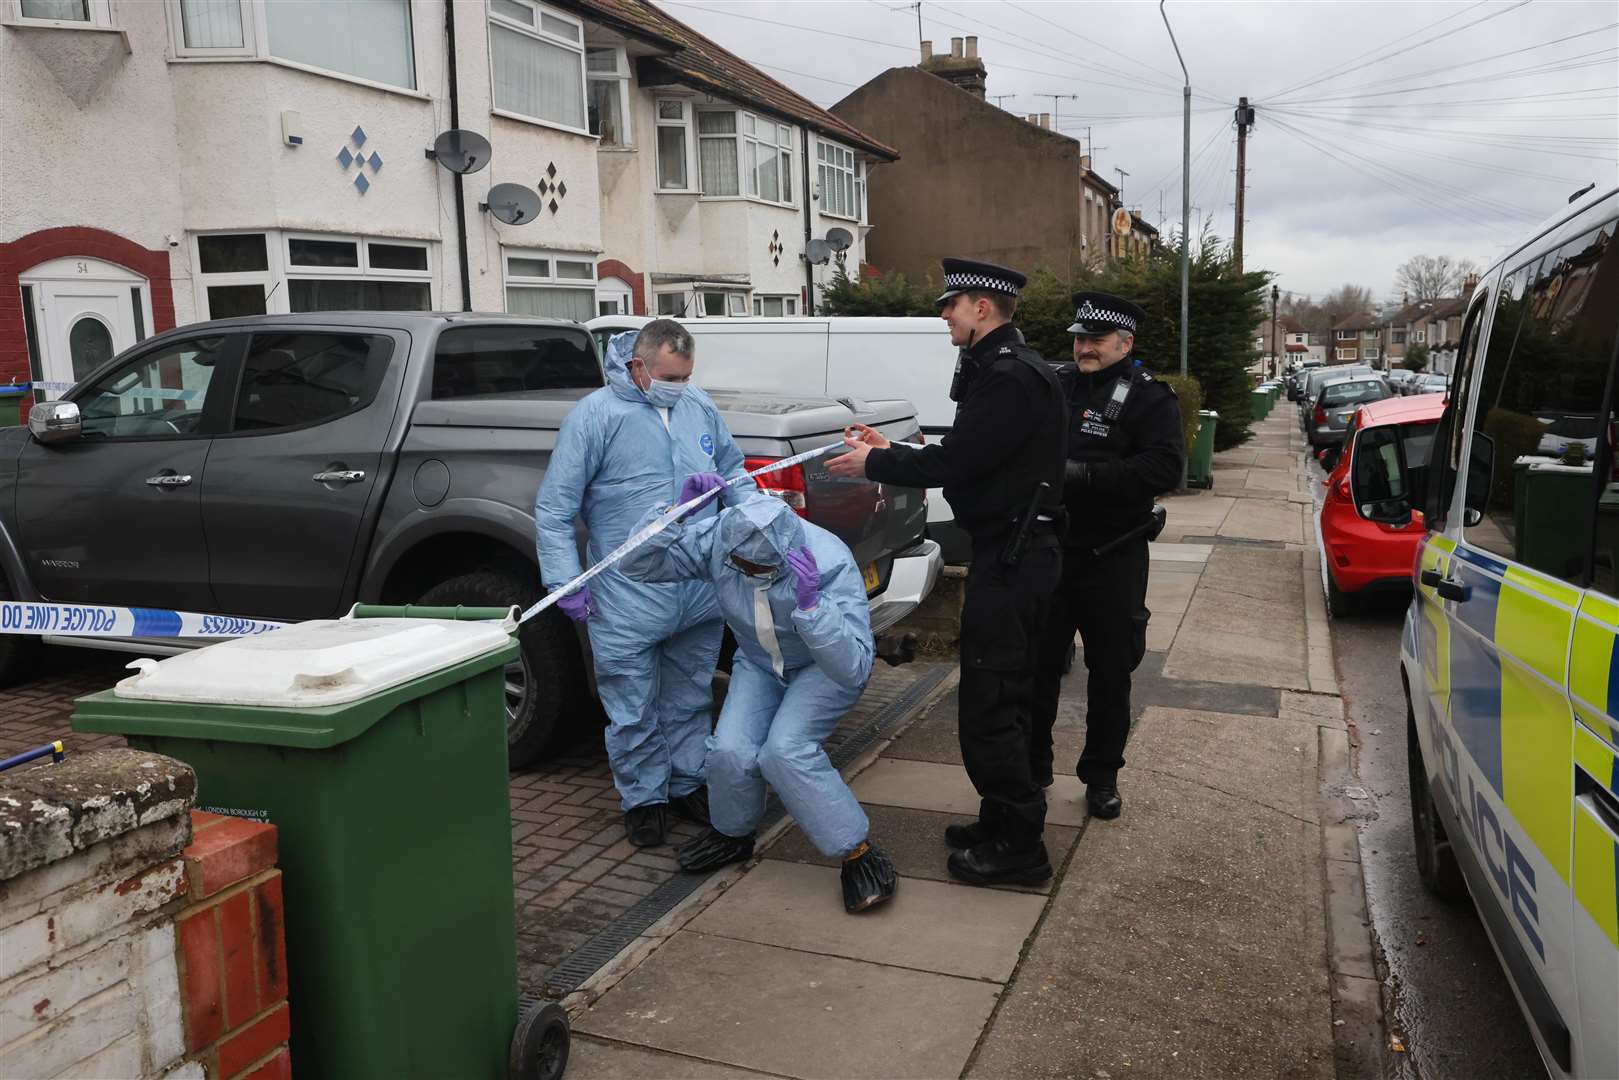 Officers were called after concerns were raised over the family's welfare. Picture: UKNIP